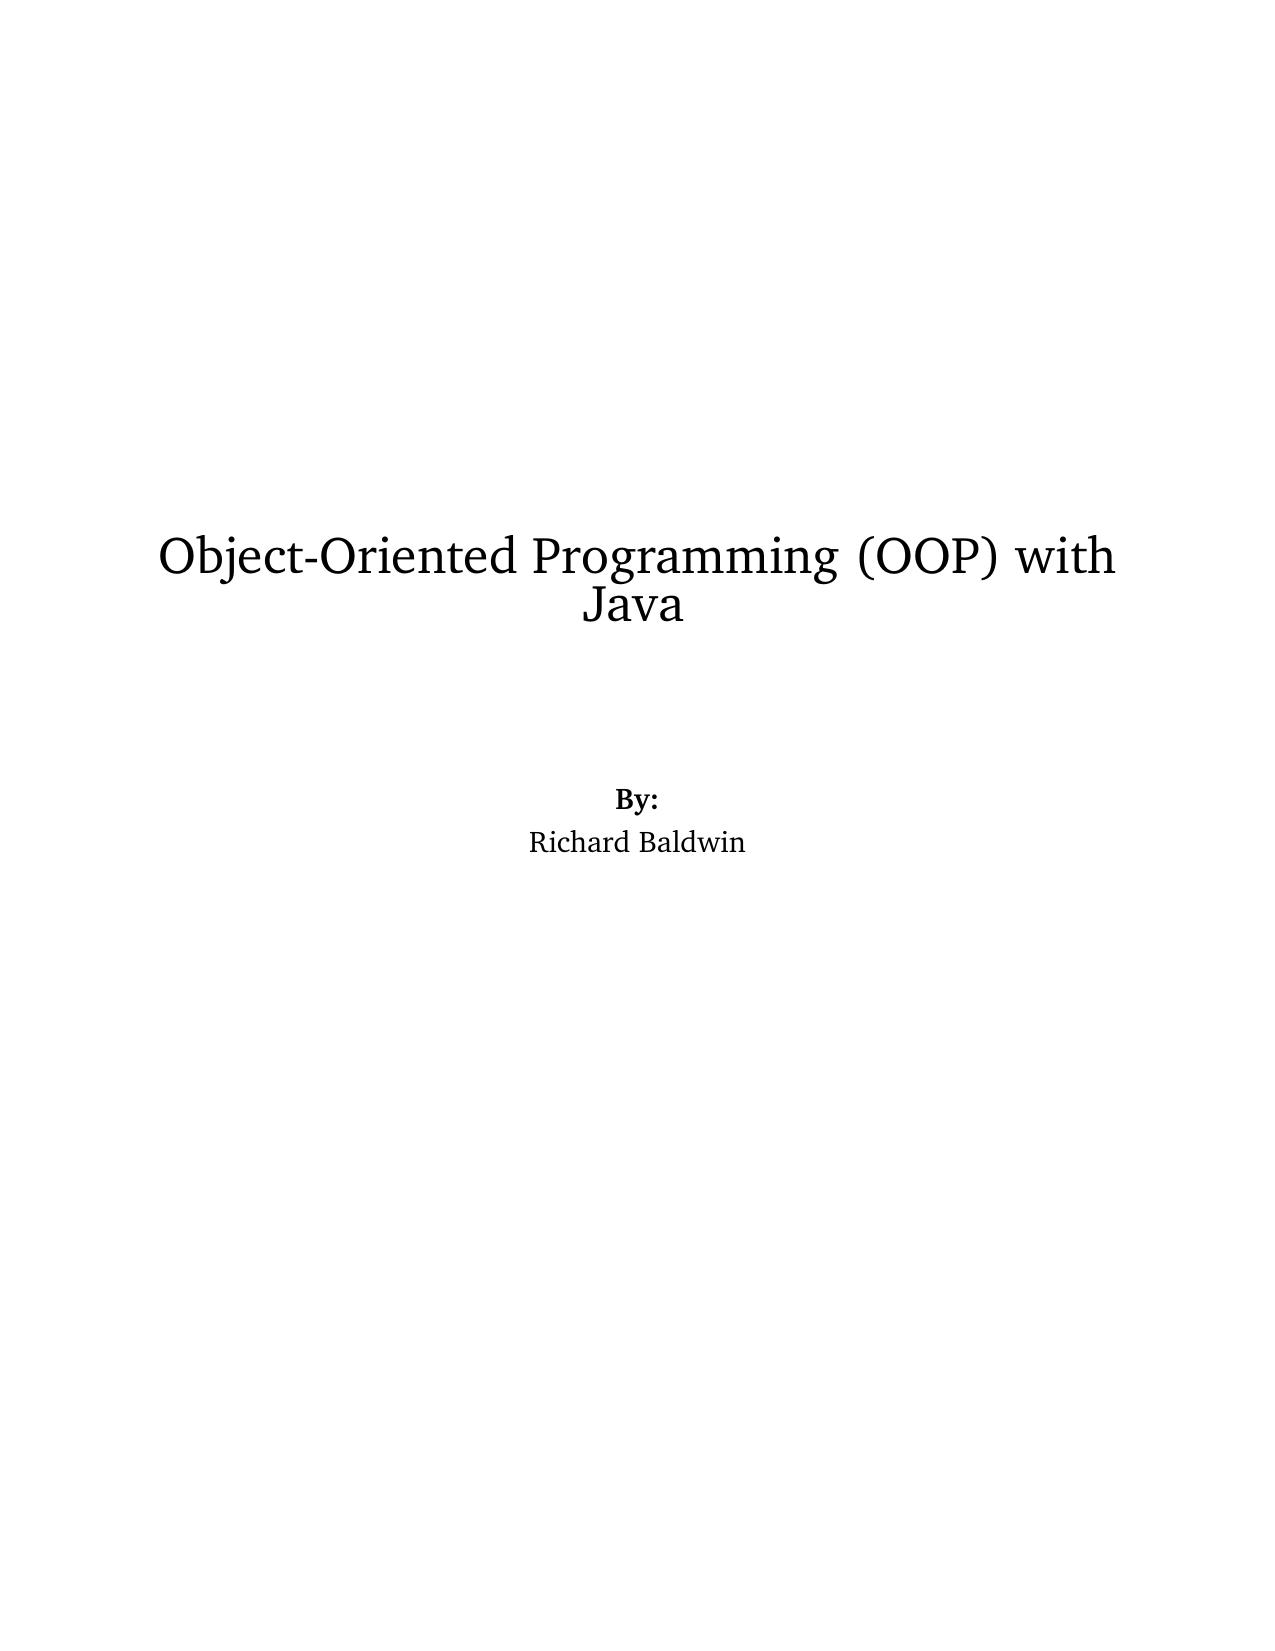 Object-Oriented Programming (OOP) with Java ( PDFDrive.com )